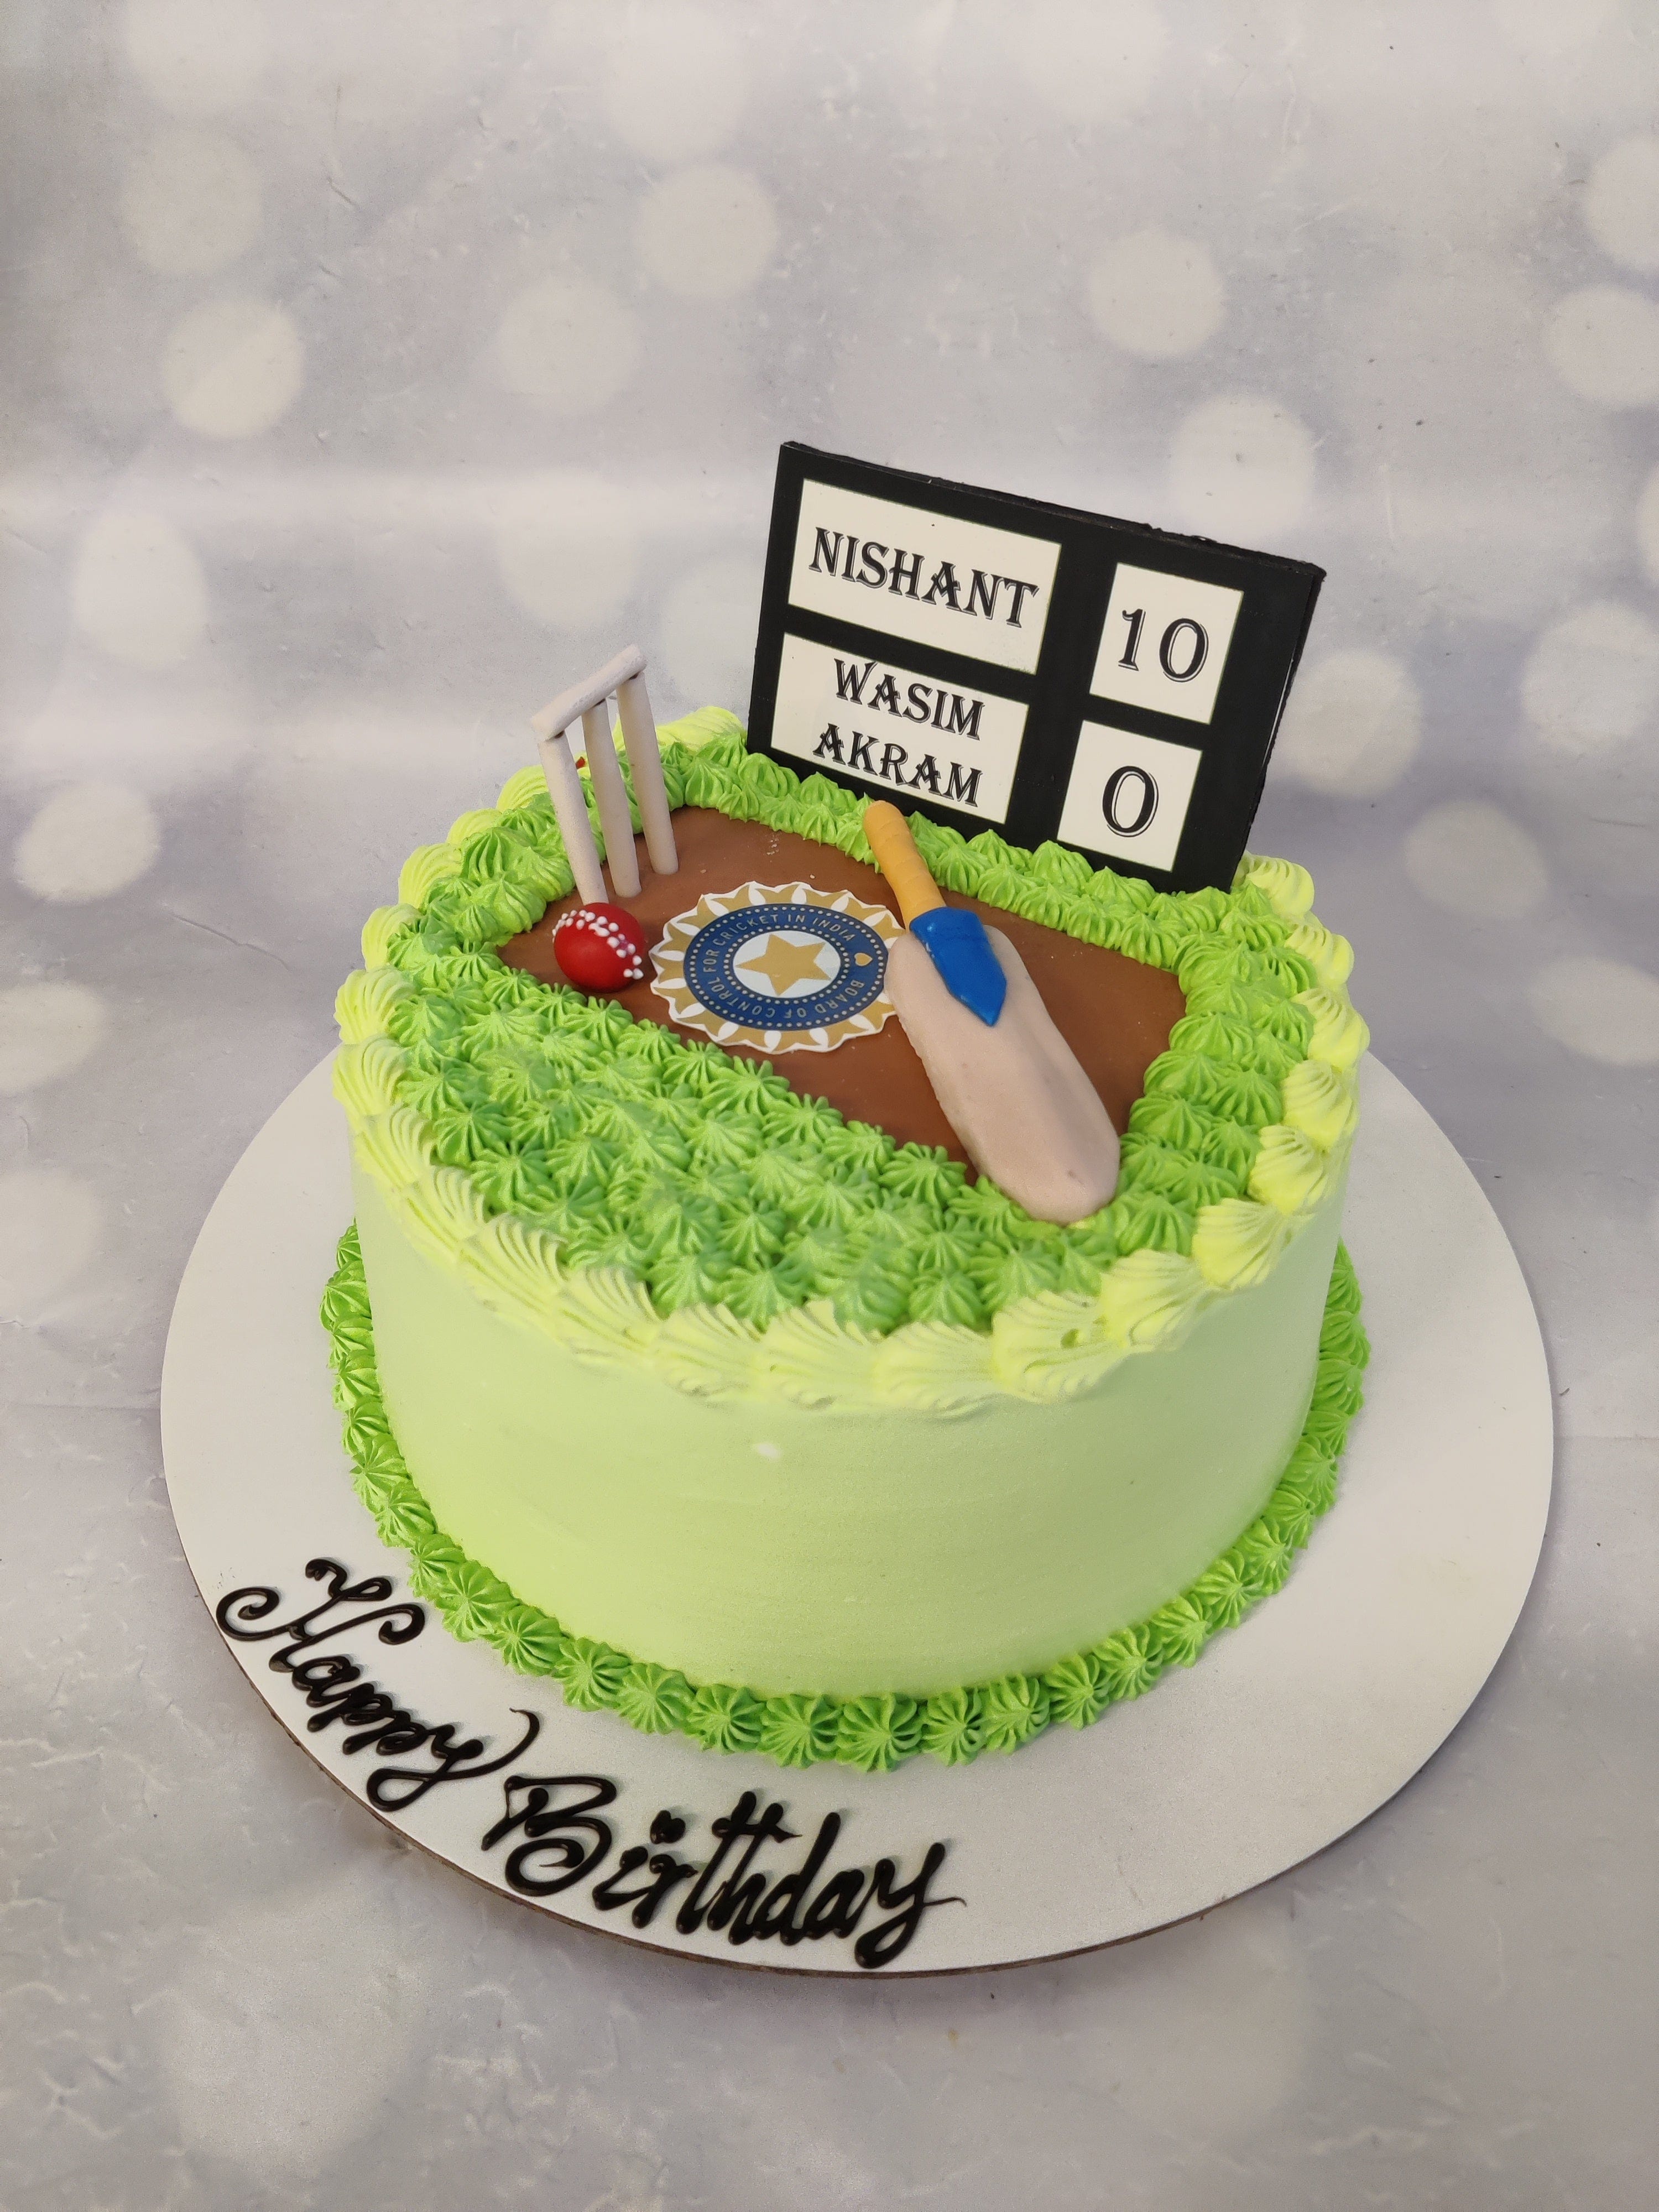 PERSONALISED CRICKET BAT AND STUMPS ANY NAME/AGE BIRTHDAY CAKE TOPPER | eBay